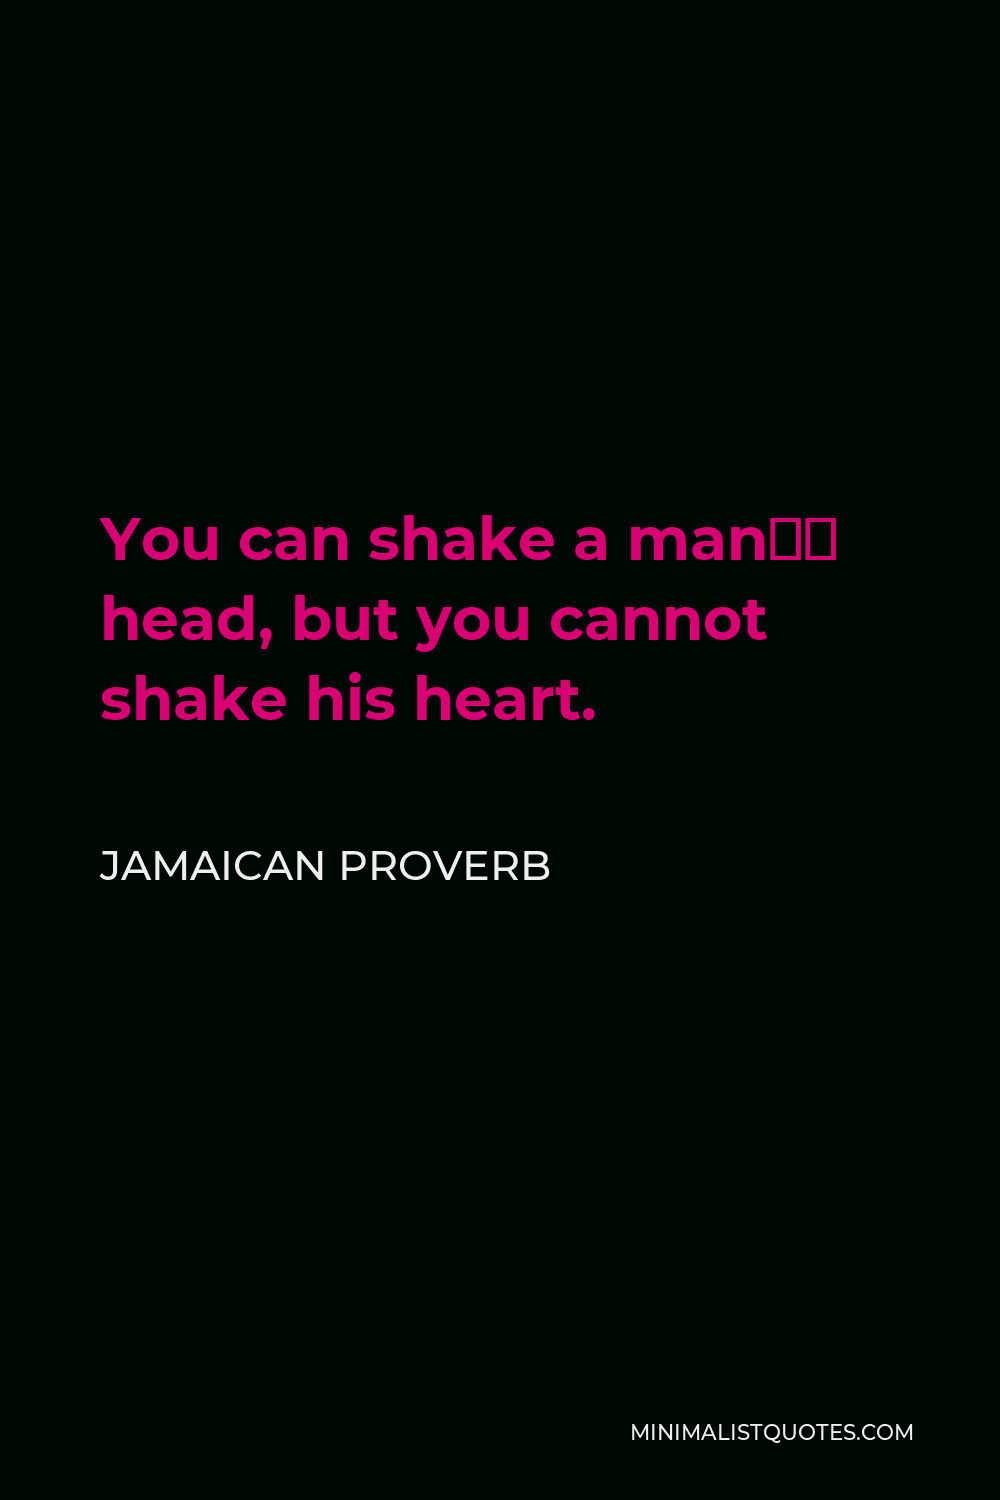 Jamaican Proverb Quote - You can shake a man’s head, but you cannot shake his heart.